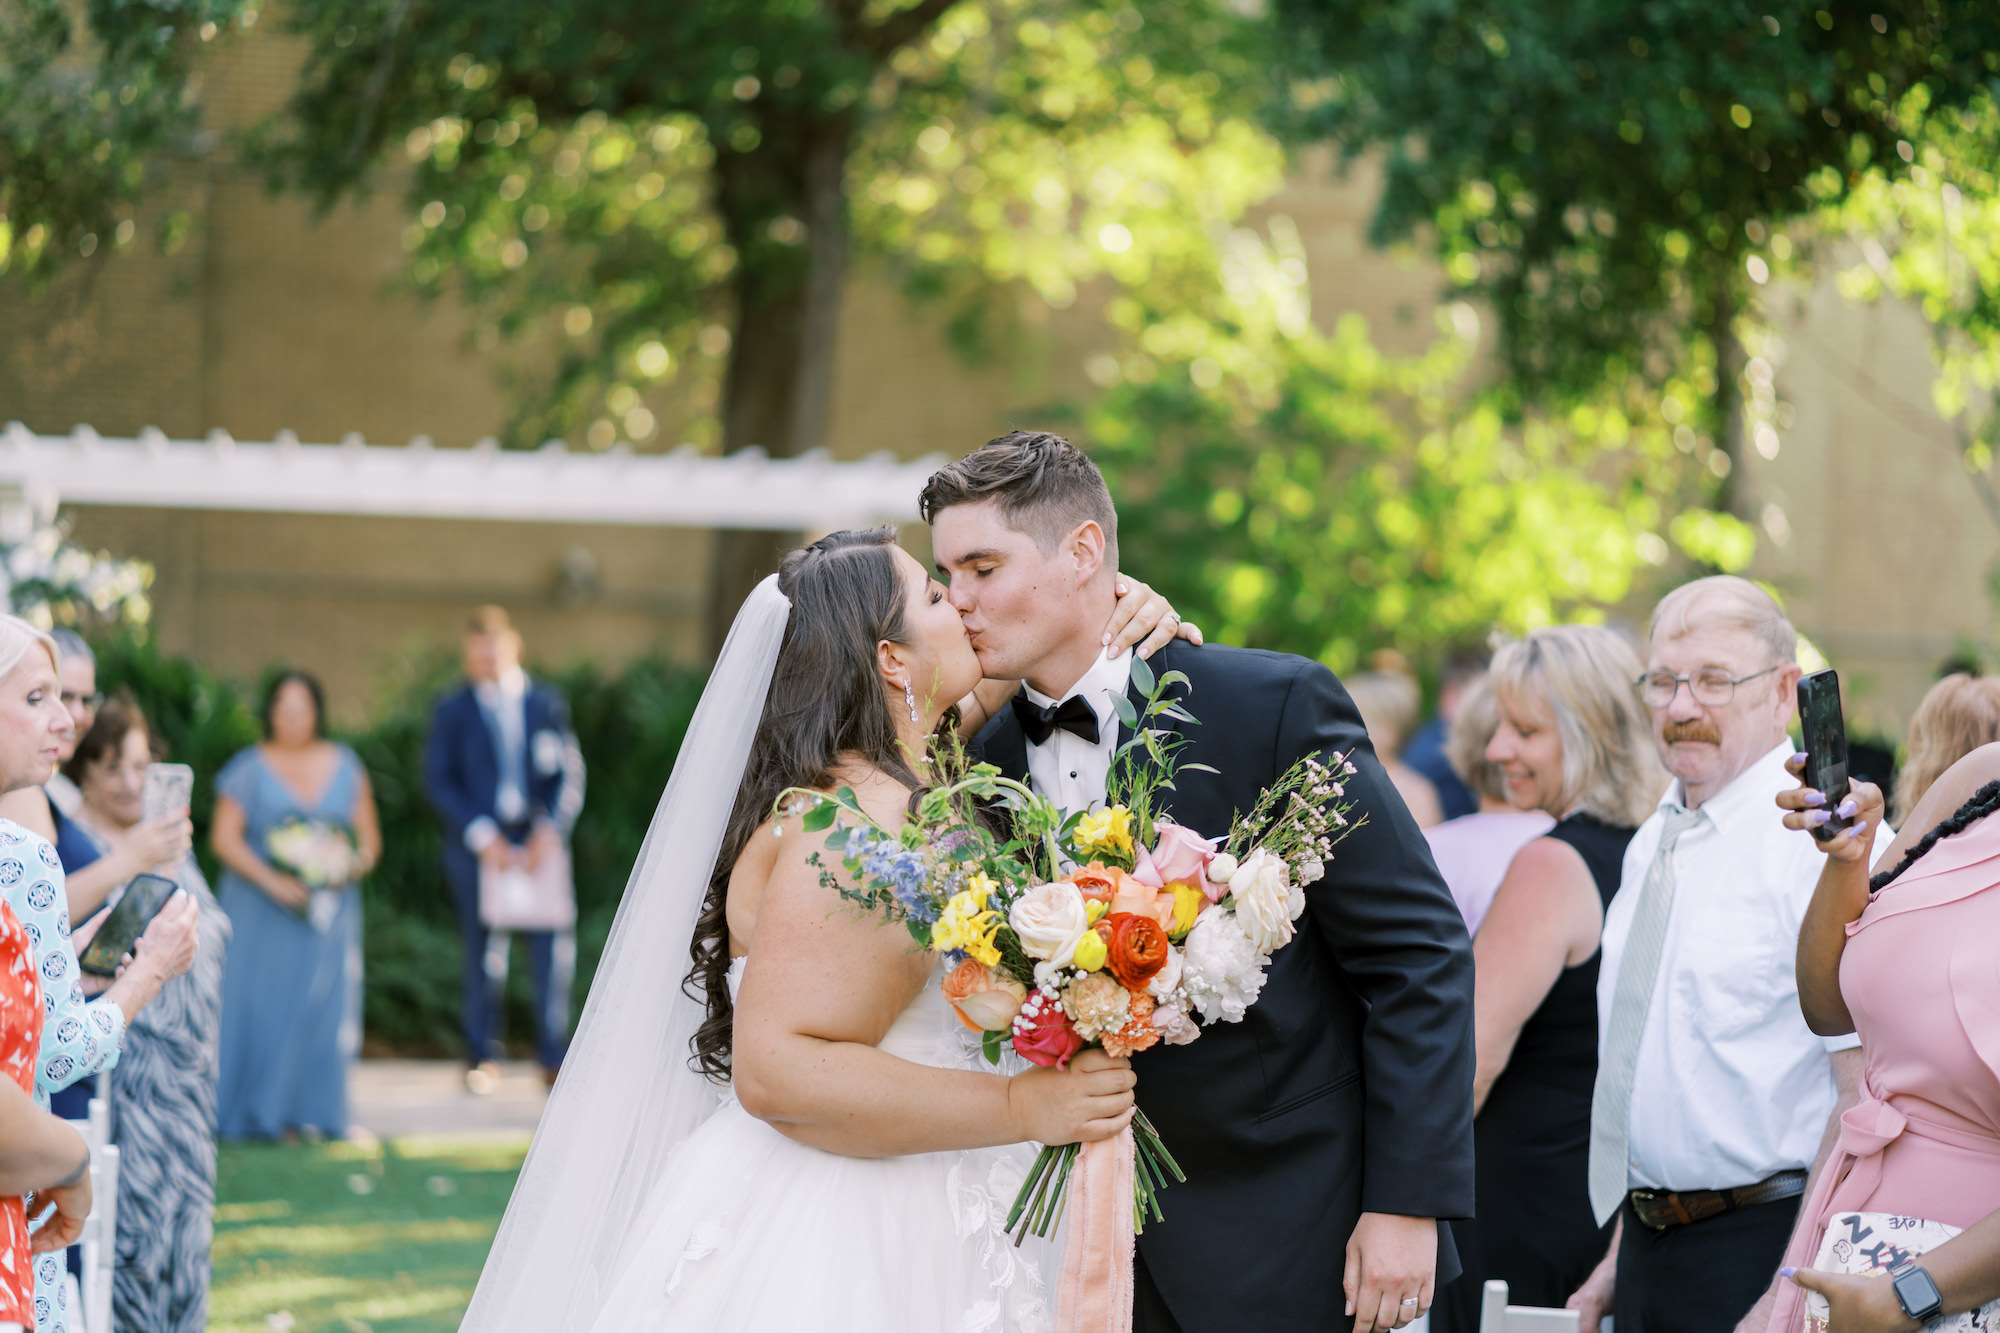 Bride and Groom Wedding Aisle Kiss | Spring Bridal Bouquet with Roses, Carnations, Snapdragons, and Greenery Ideas